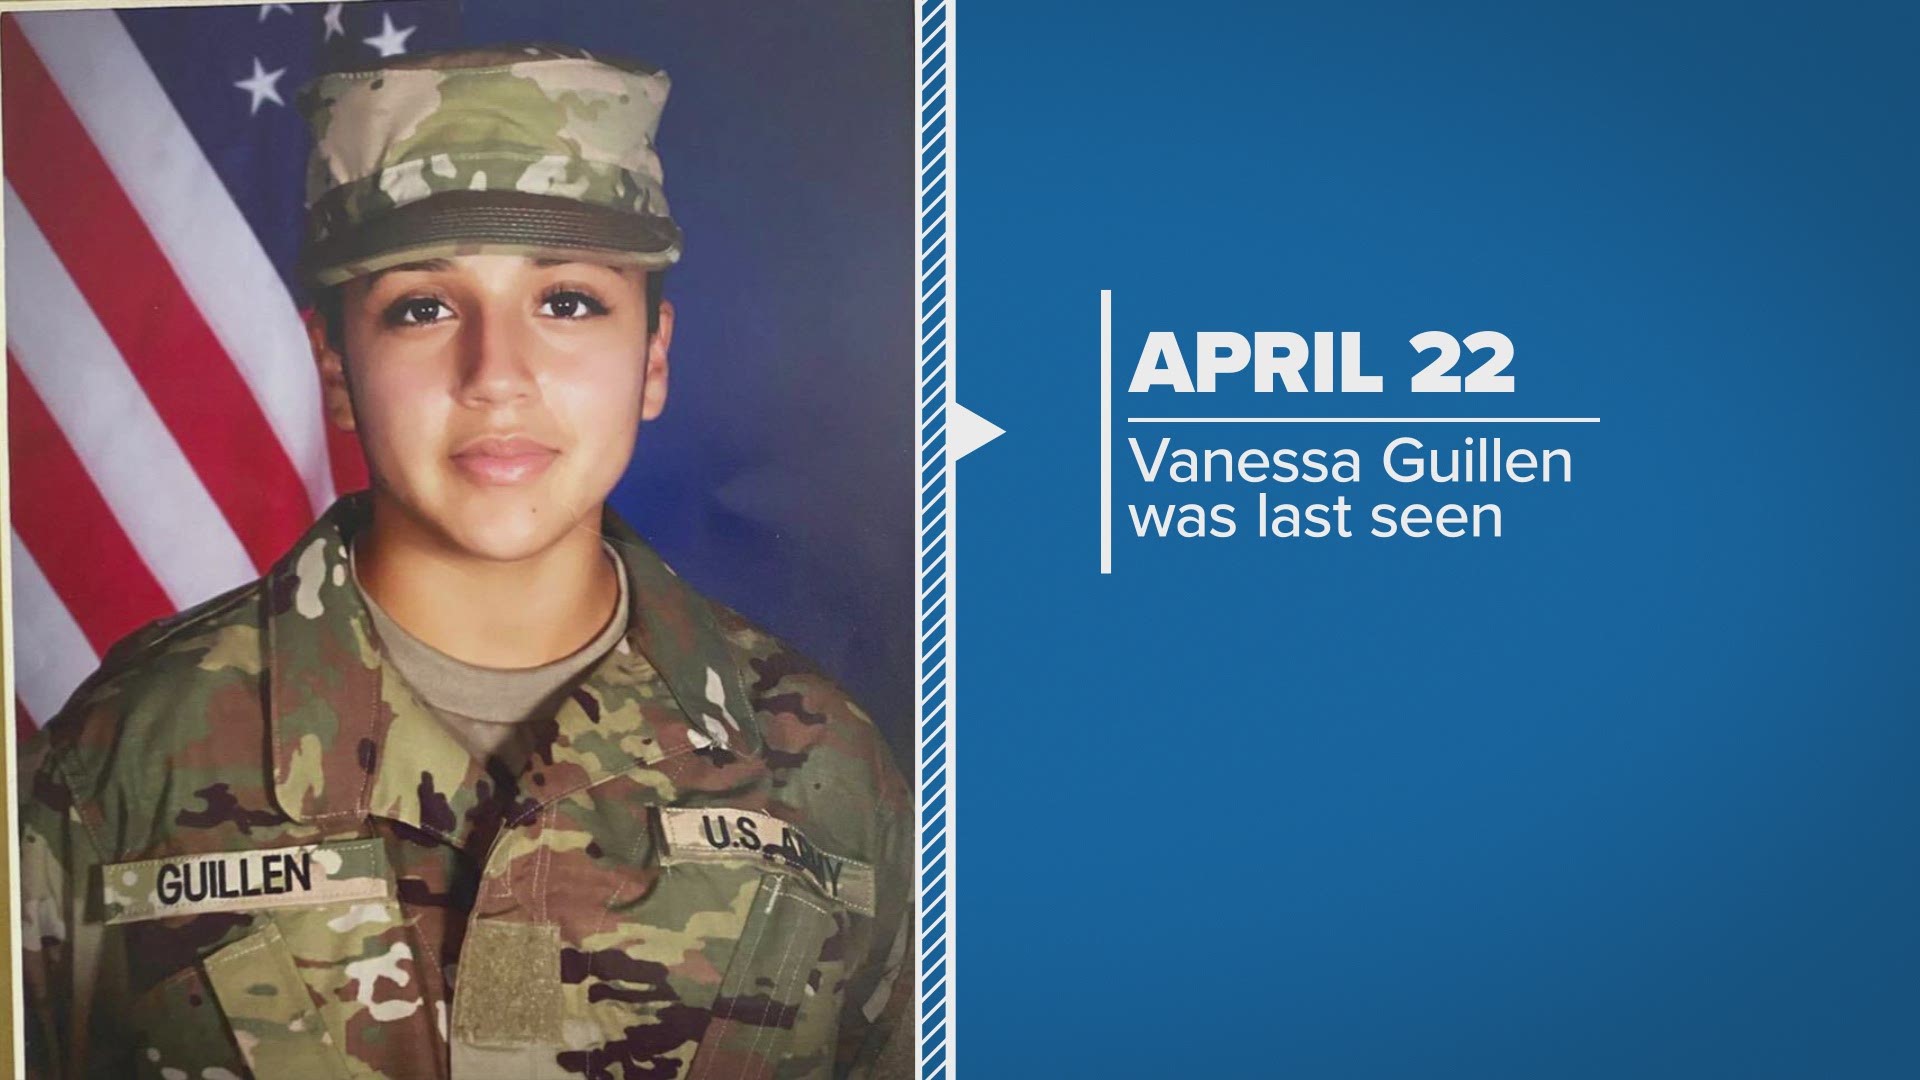 Here is a known timeline of events surrounding the disappearance of Pfc. Vanessa Guillen of Fort Hood.